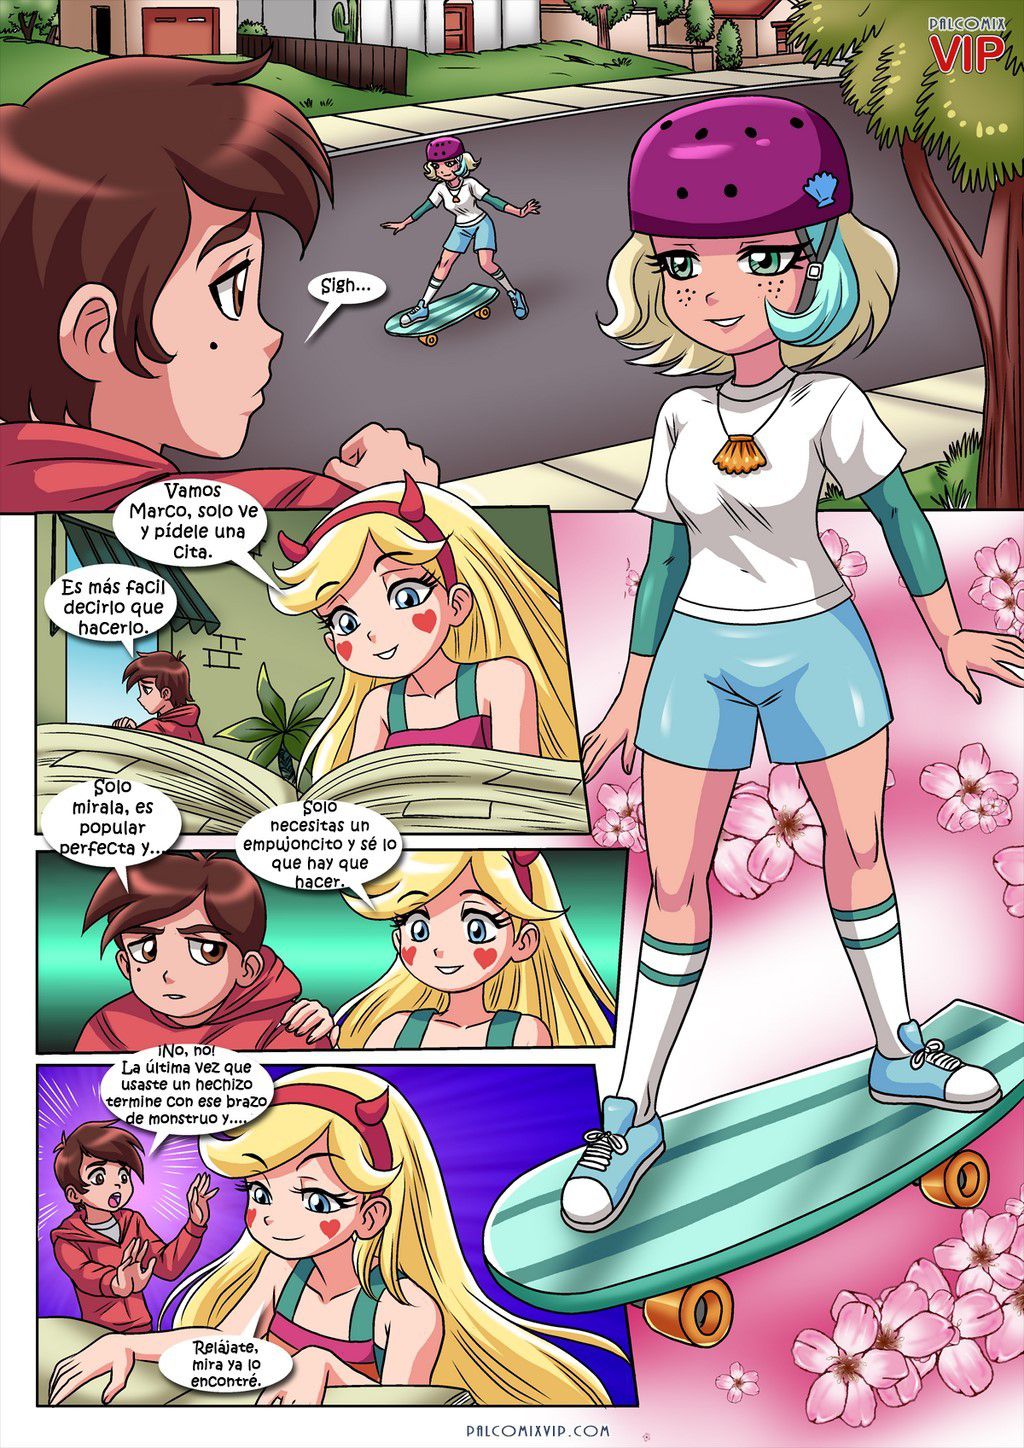 [Palcomix] Amante Latino (Star vs. the Forces of Evil) [Spanish] 2